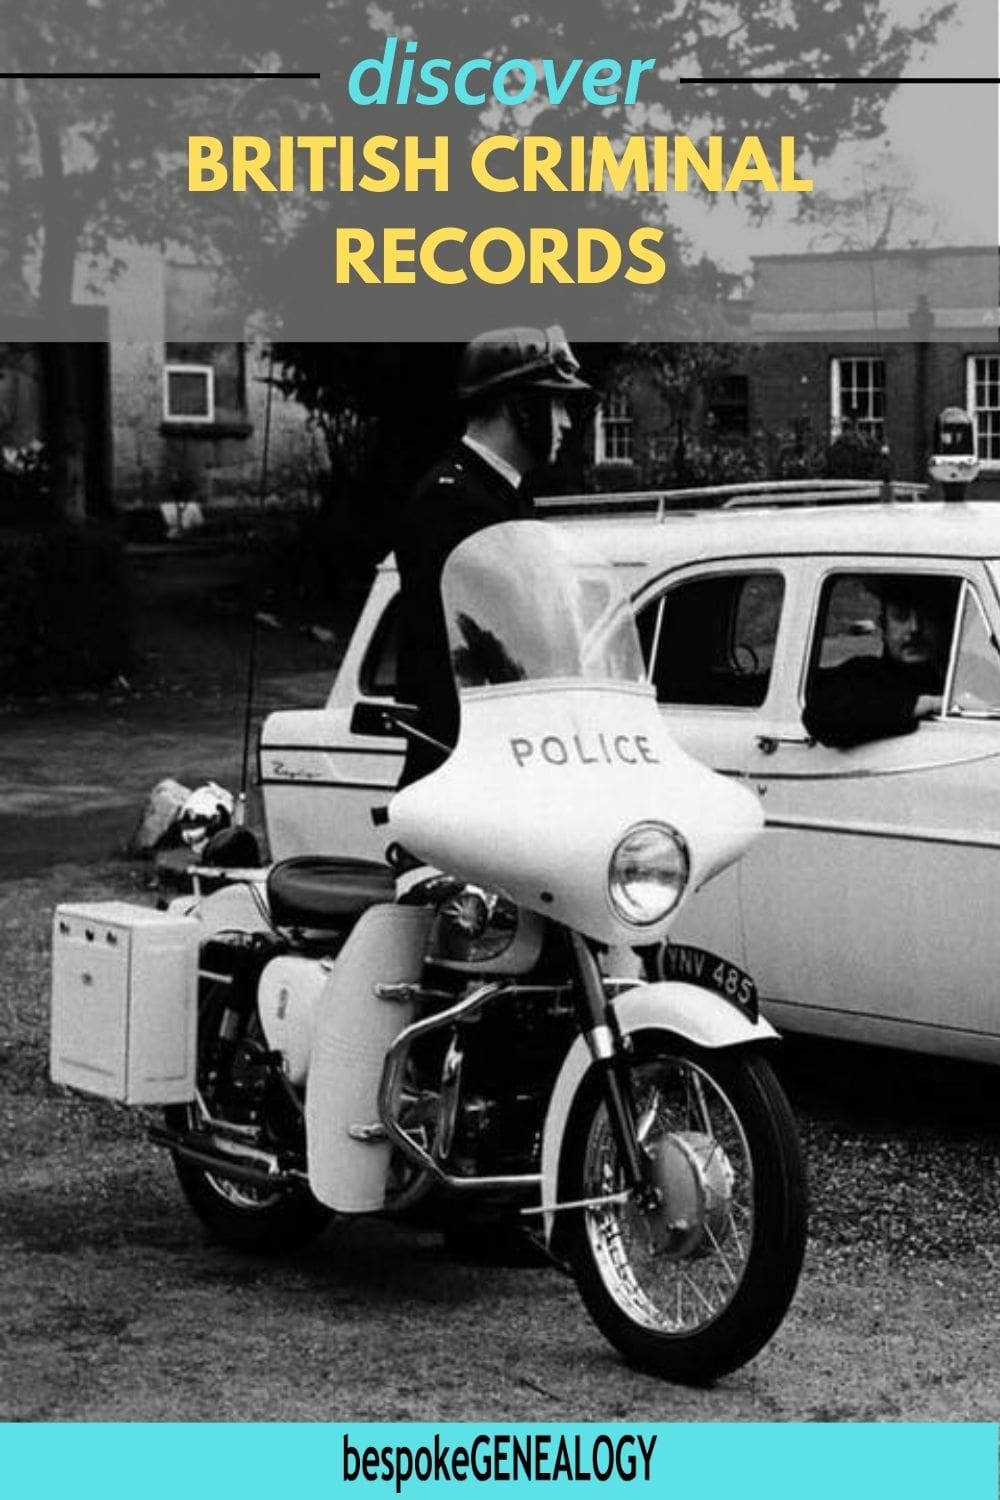 Pinterest Pin. Discover British Criminal Records. Photo from the 1960s of a policeman on a motorbike talking to another in a car.